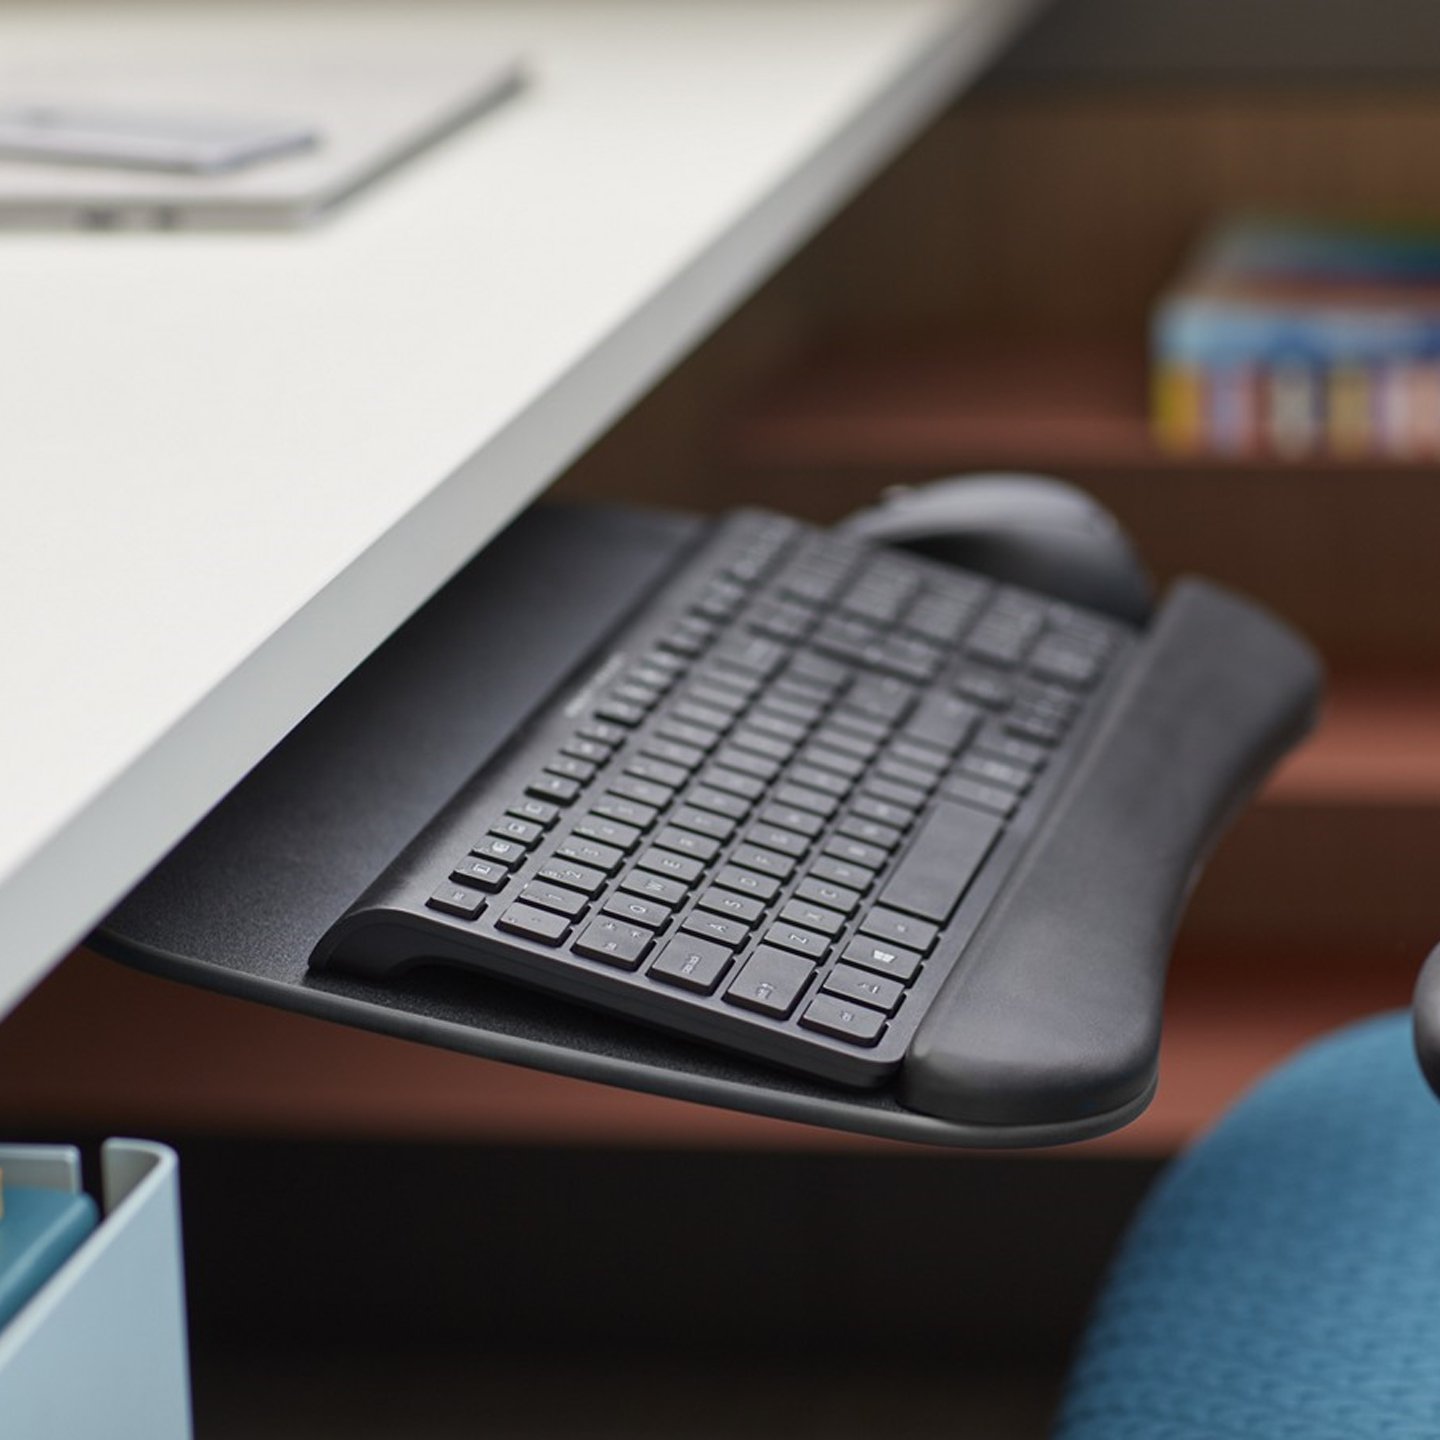 Haworth Technology Accessories with Keyboard and mouse attached to desk in a black color